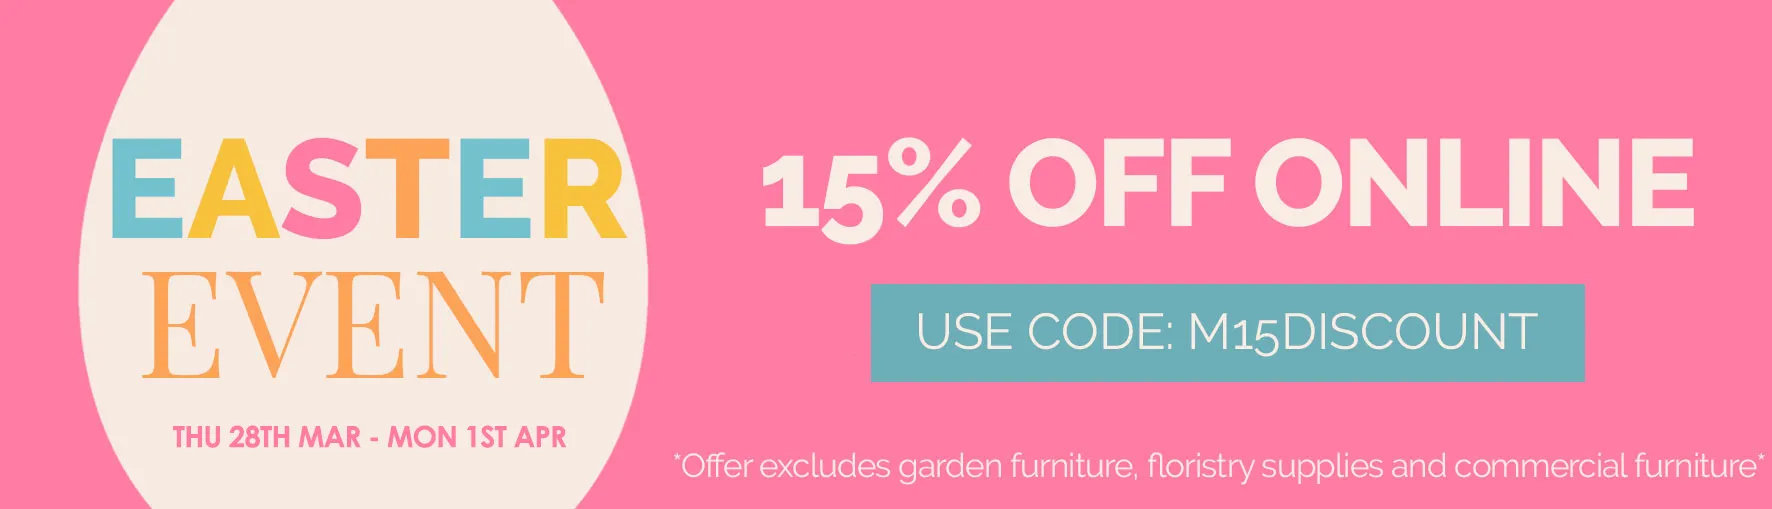 easter event sale 15% off online - use code M15DISCOUNT - 28th March till 1st April - excludes garden furniture, floristy supplies and commercial furniture